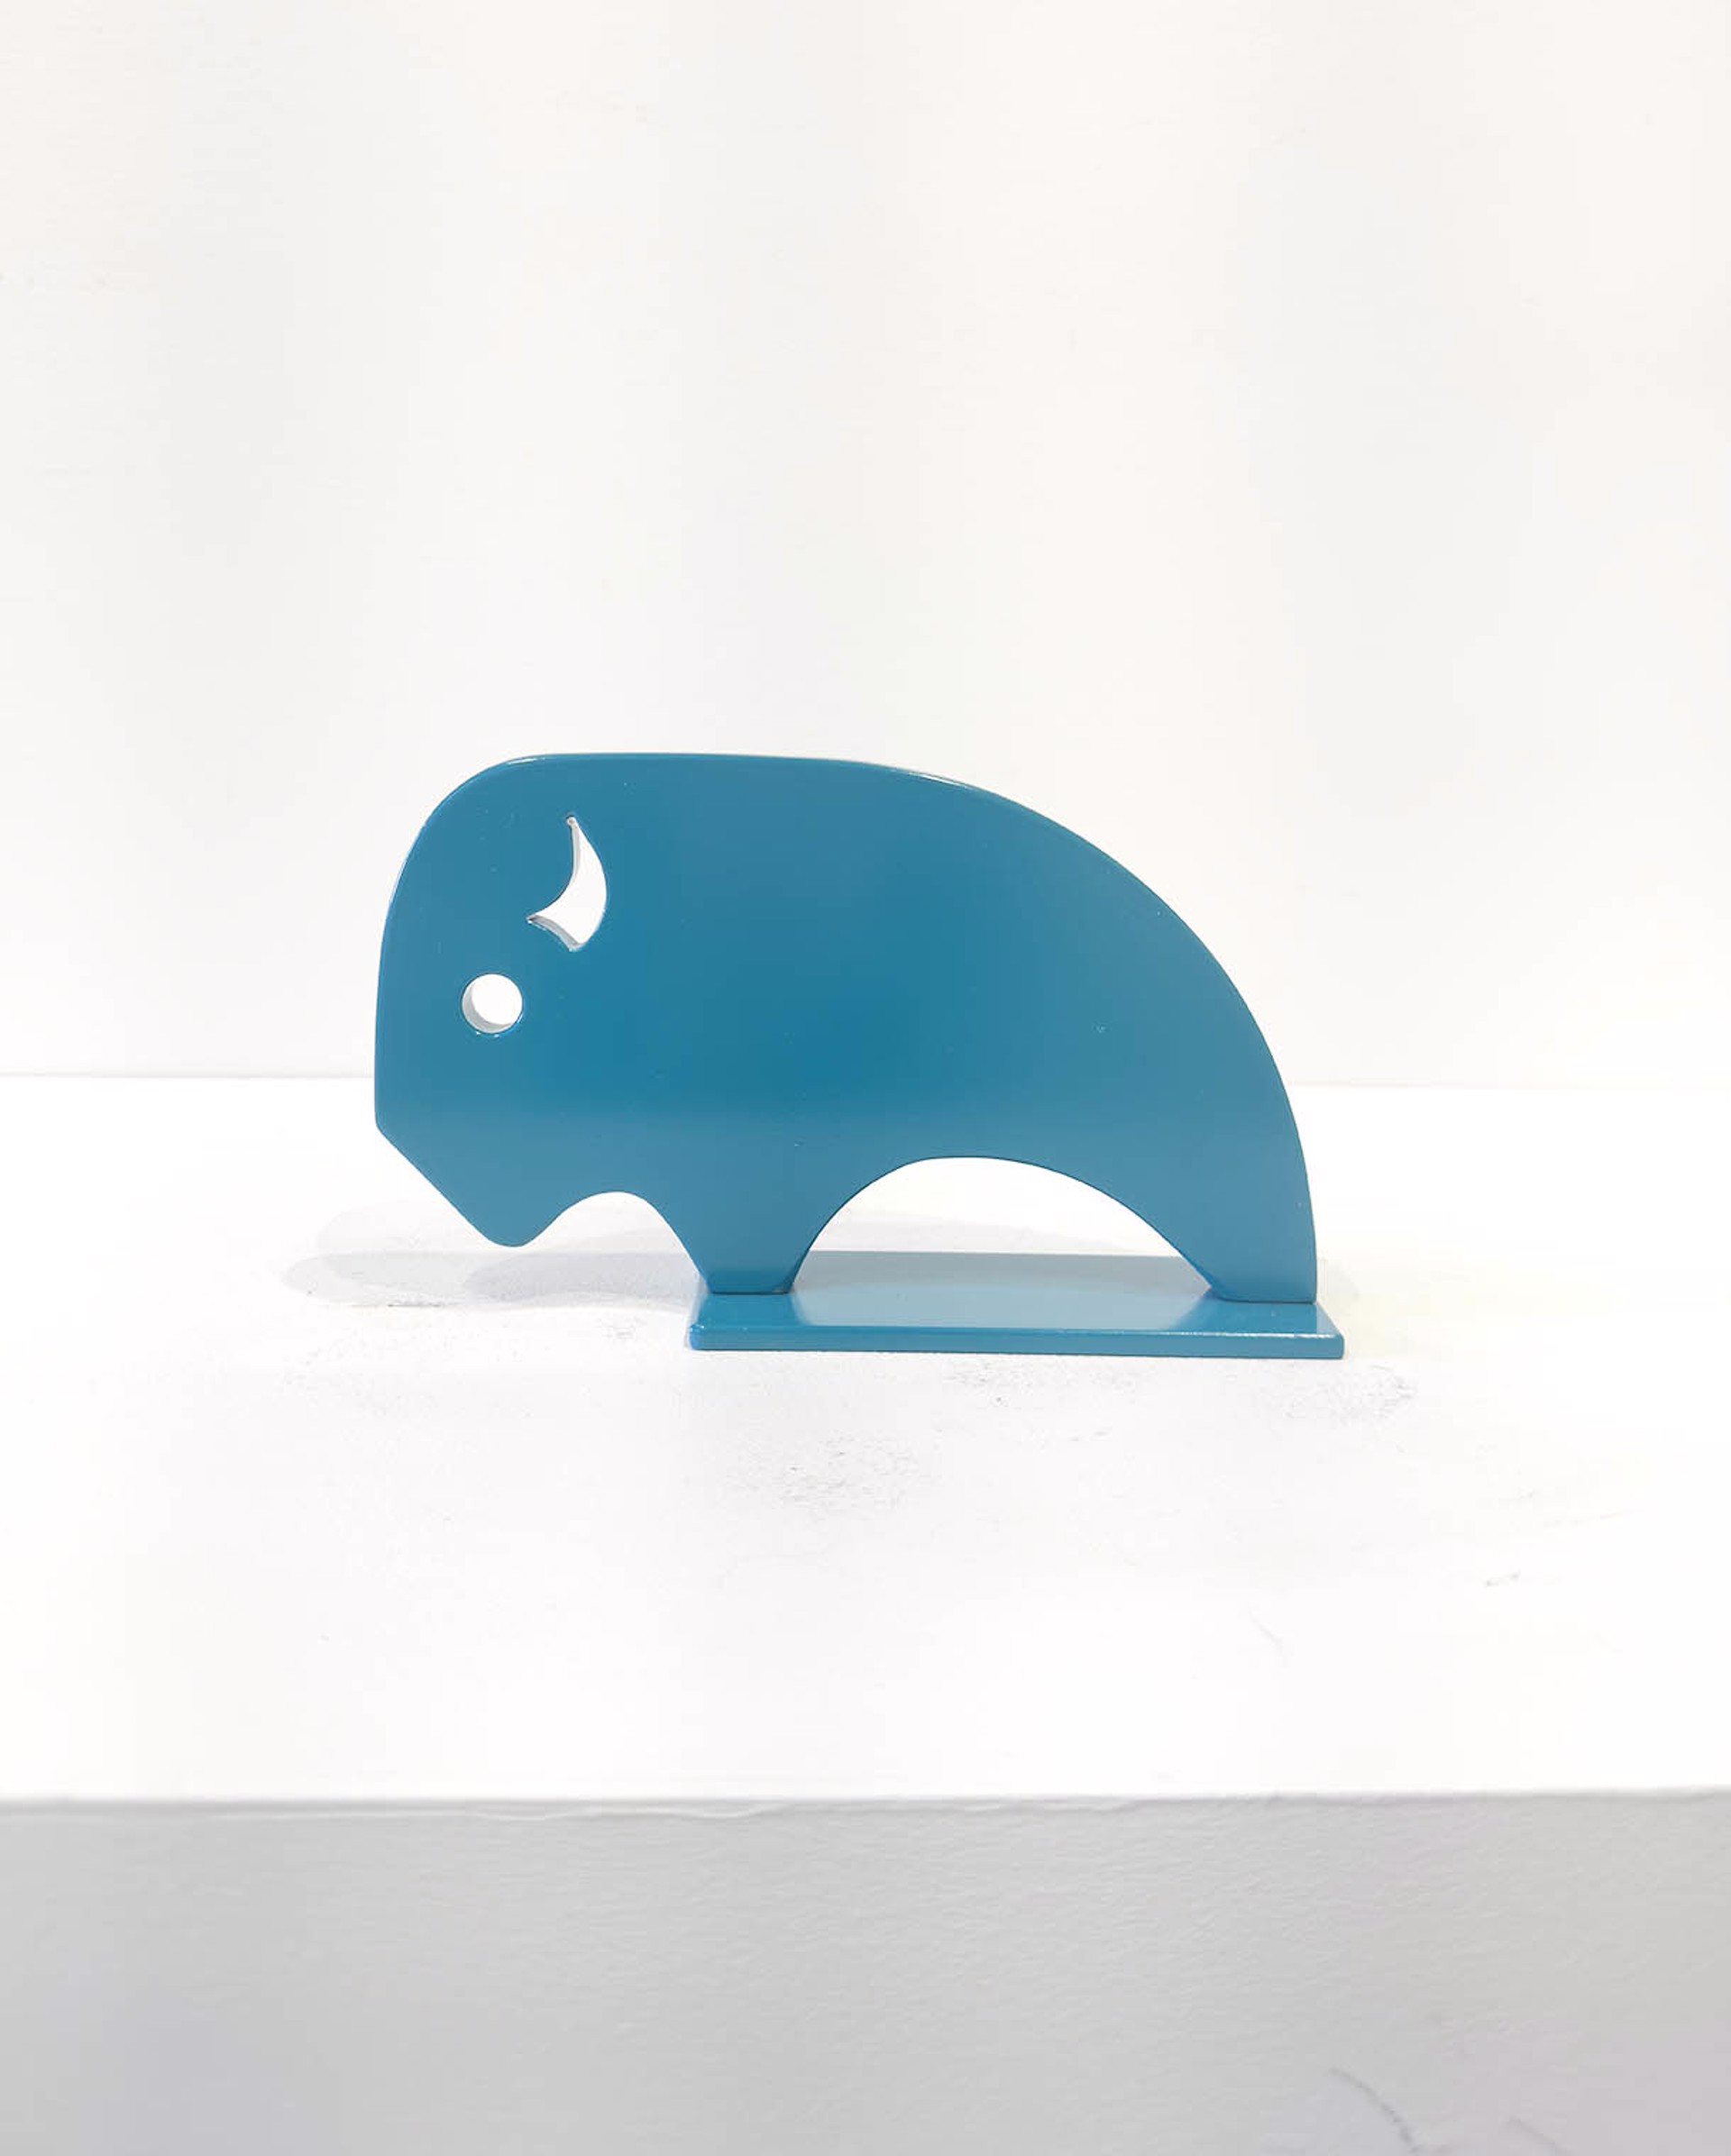 Aluminium Sculpture By Jeffie Brewer Featuring A Bison In Simplified Shapes And Teal Finish